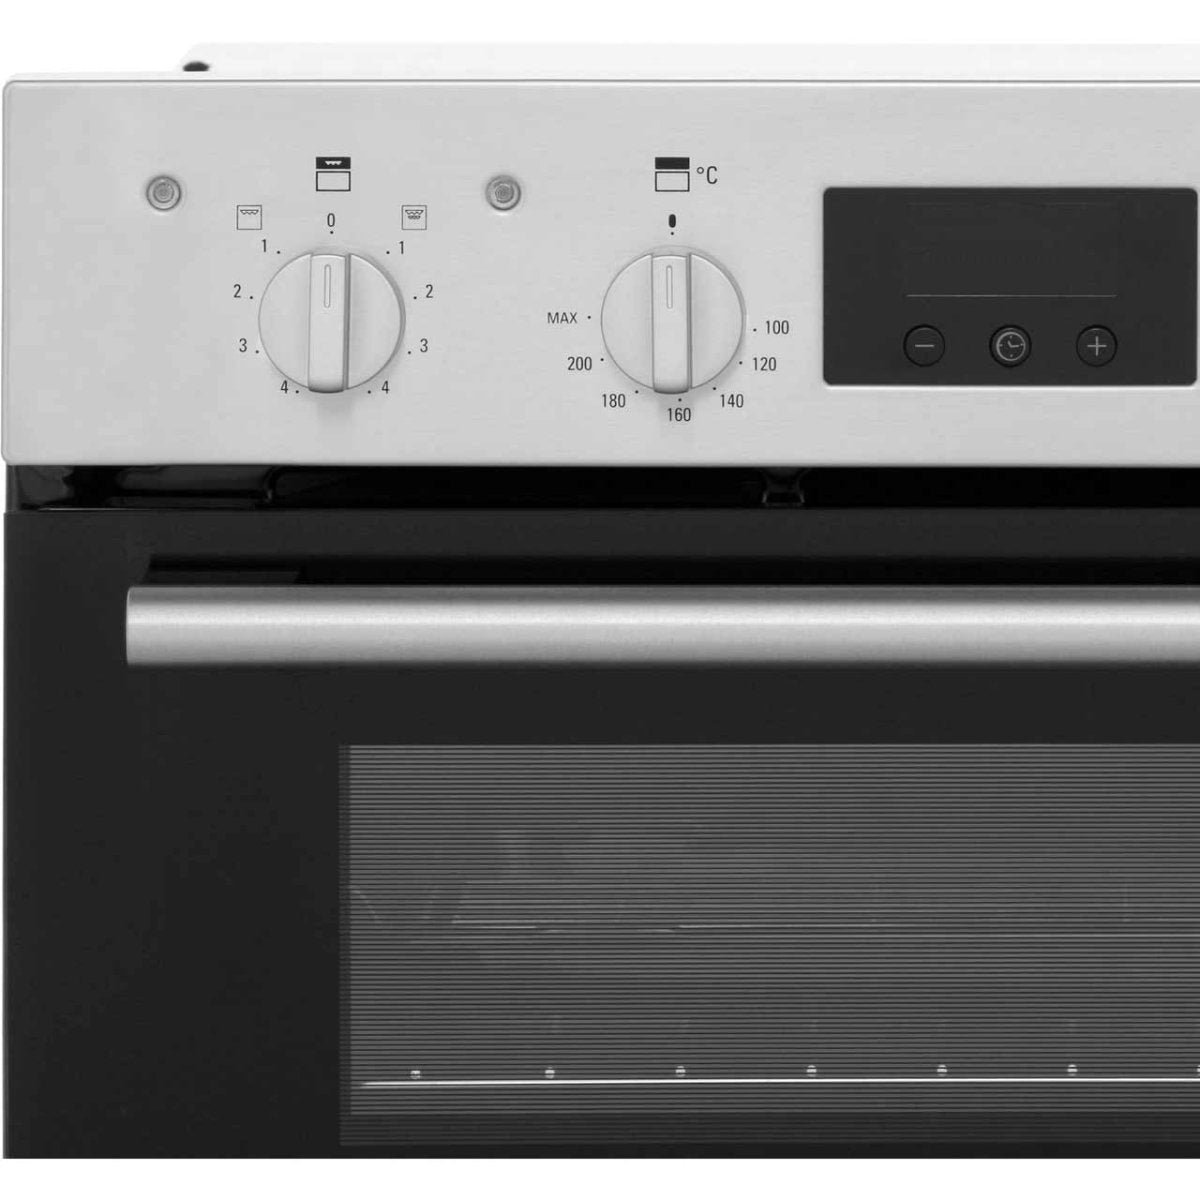 Hotpoint Class 2 DD2540BL Built In Electric Double Oven - Black - A/A Rated - Atlantic Electrics